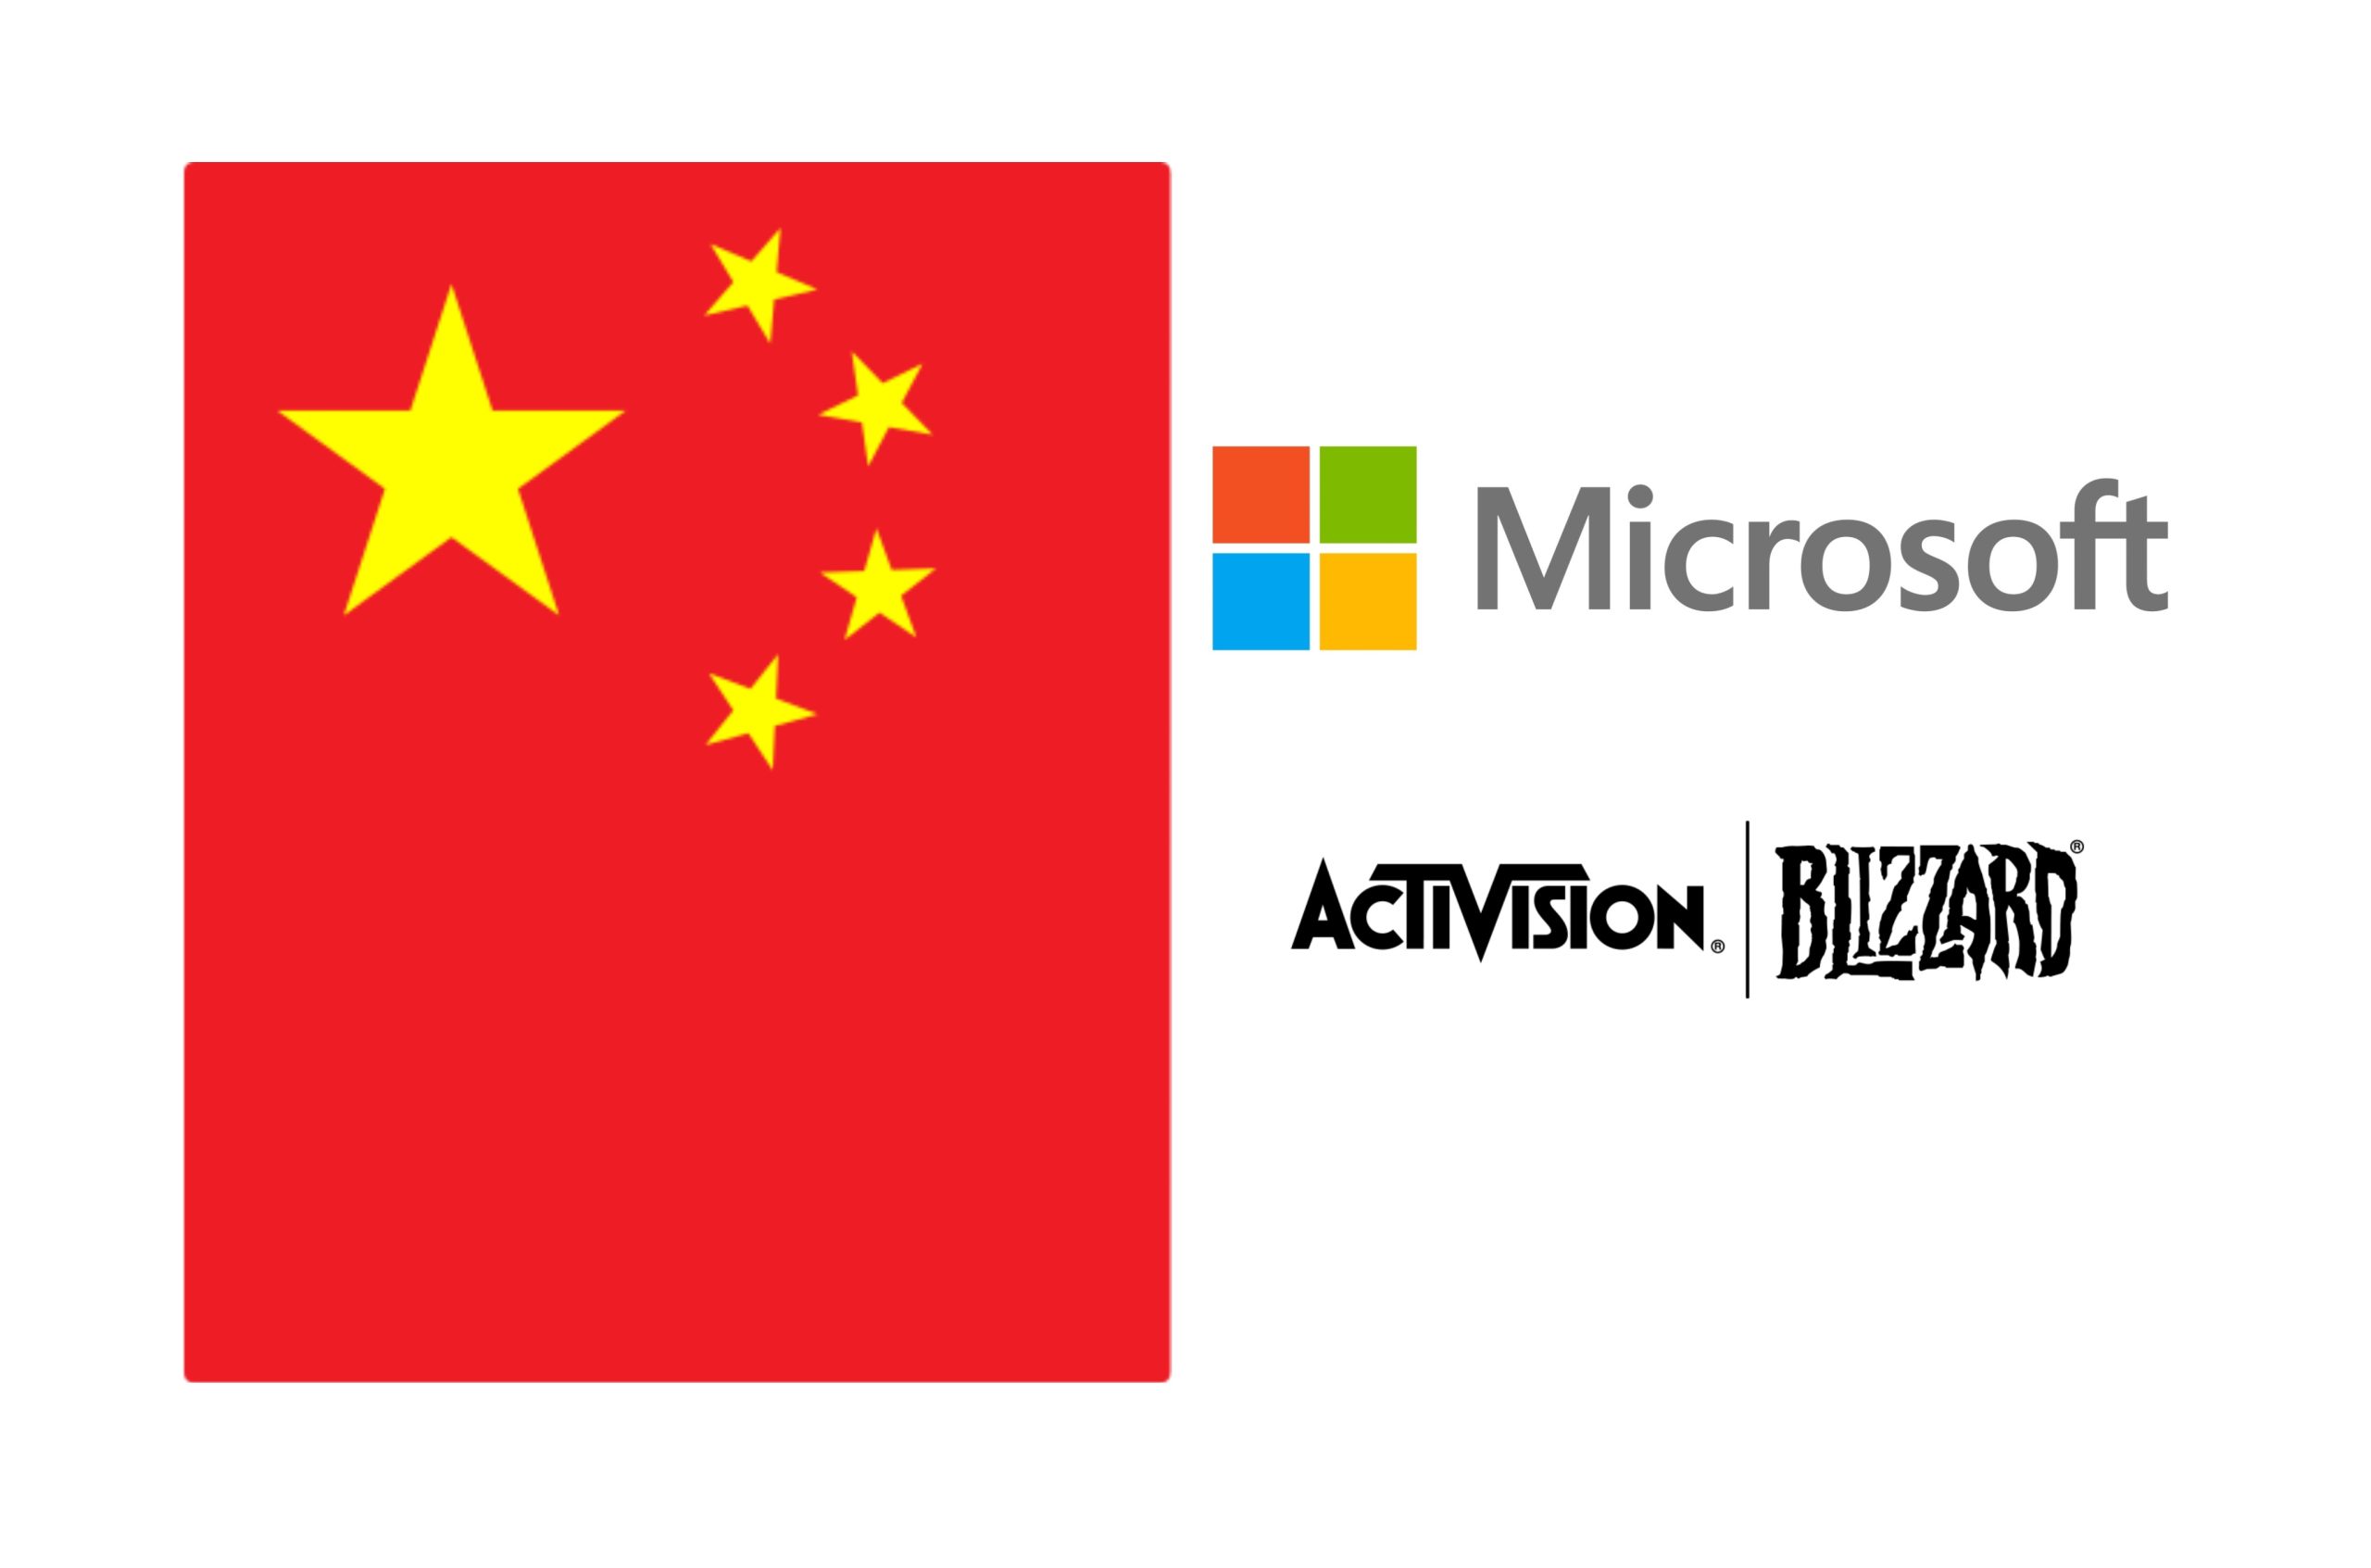 Microsoft's Activision Blizzard acquisition has been approved in China